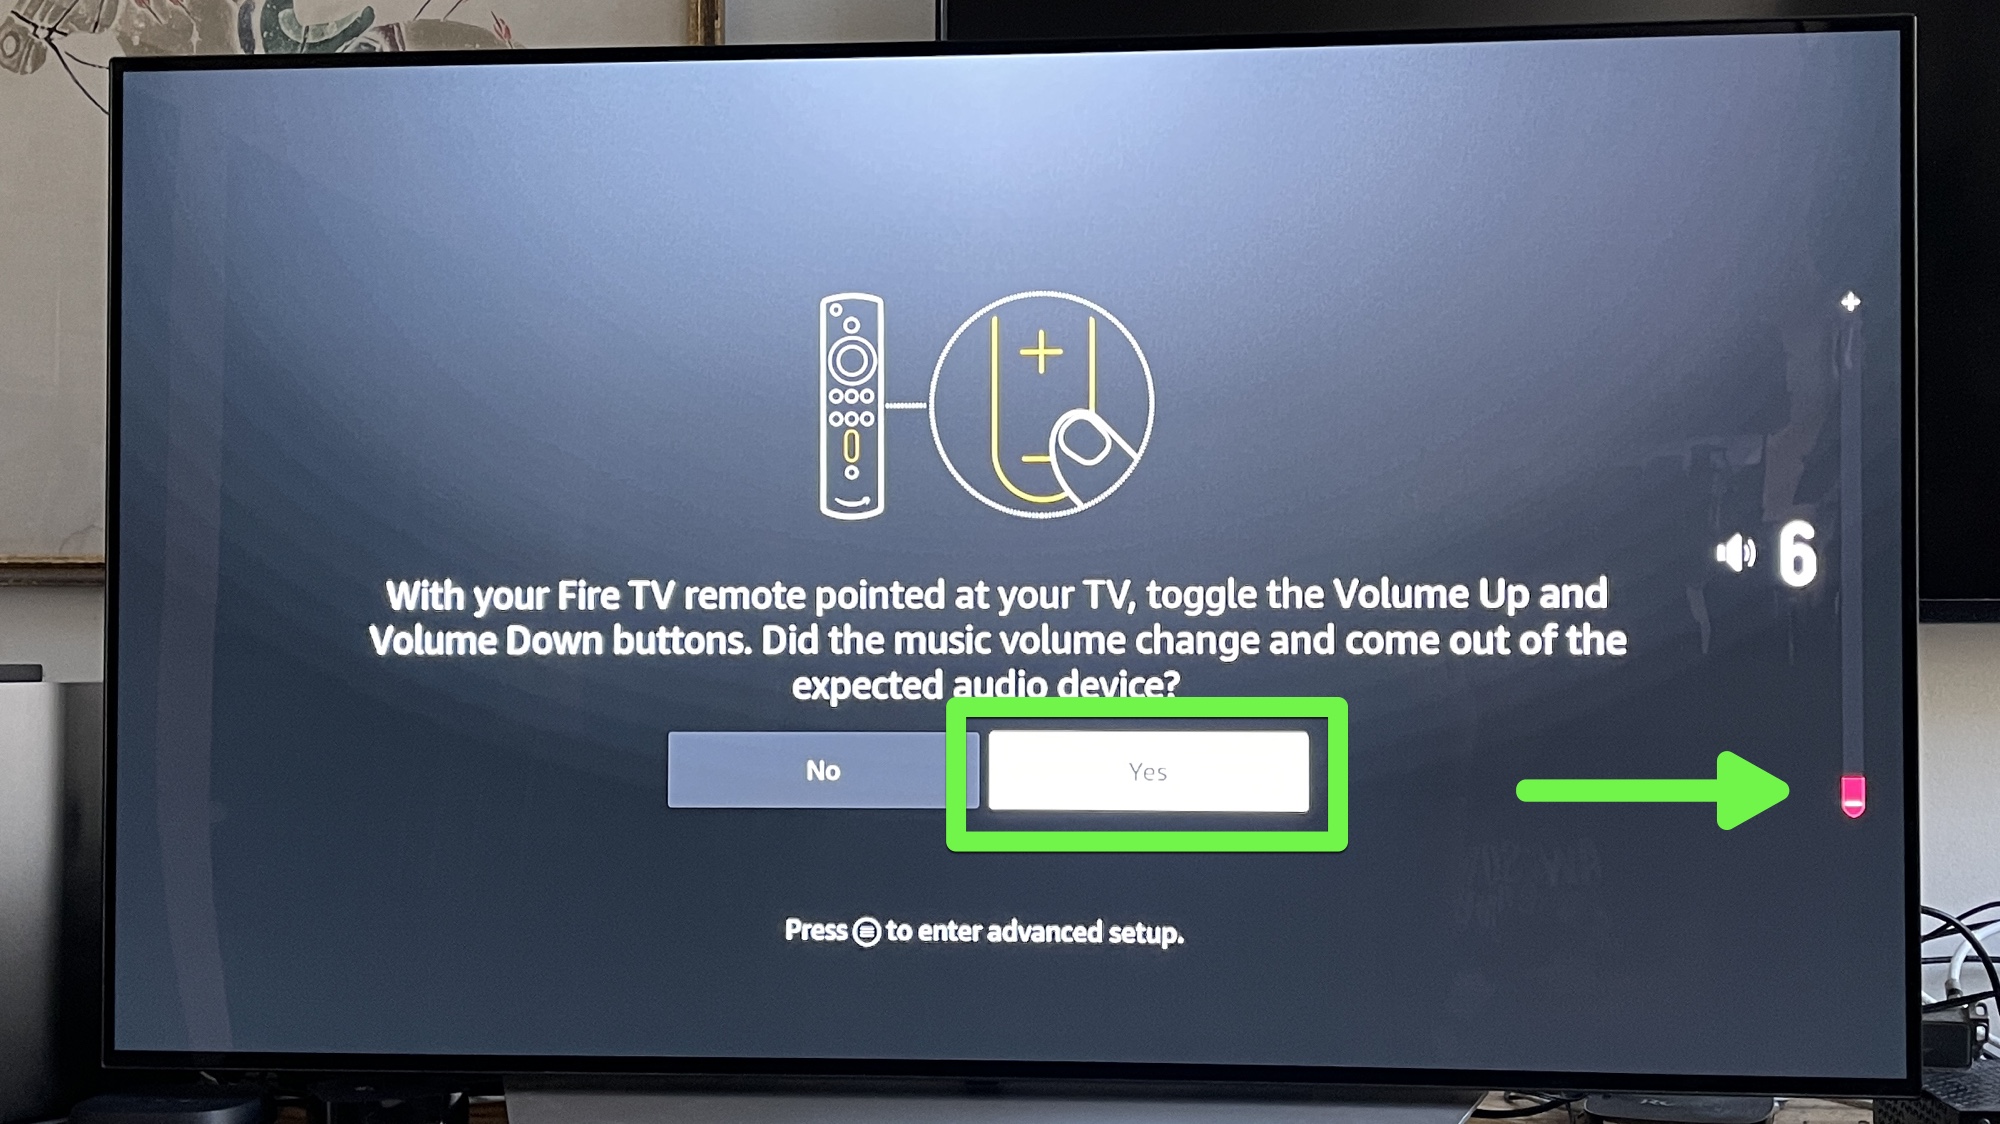 Amazon Fire TV setup screen asking you to modify volume with the remote and, if that works, click Yes.